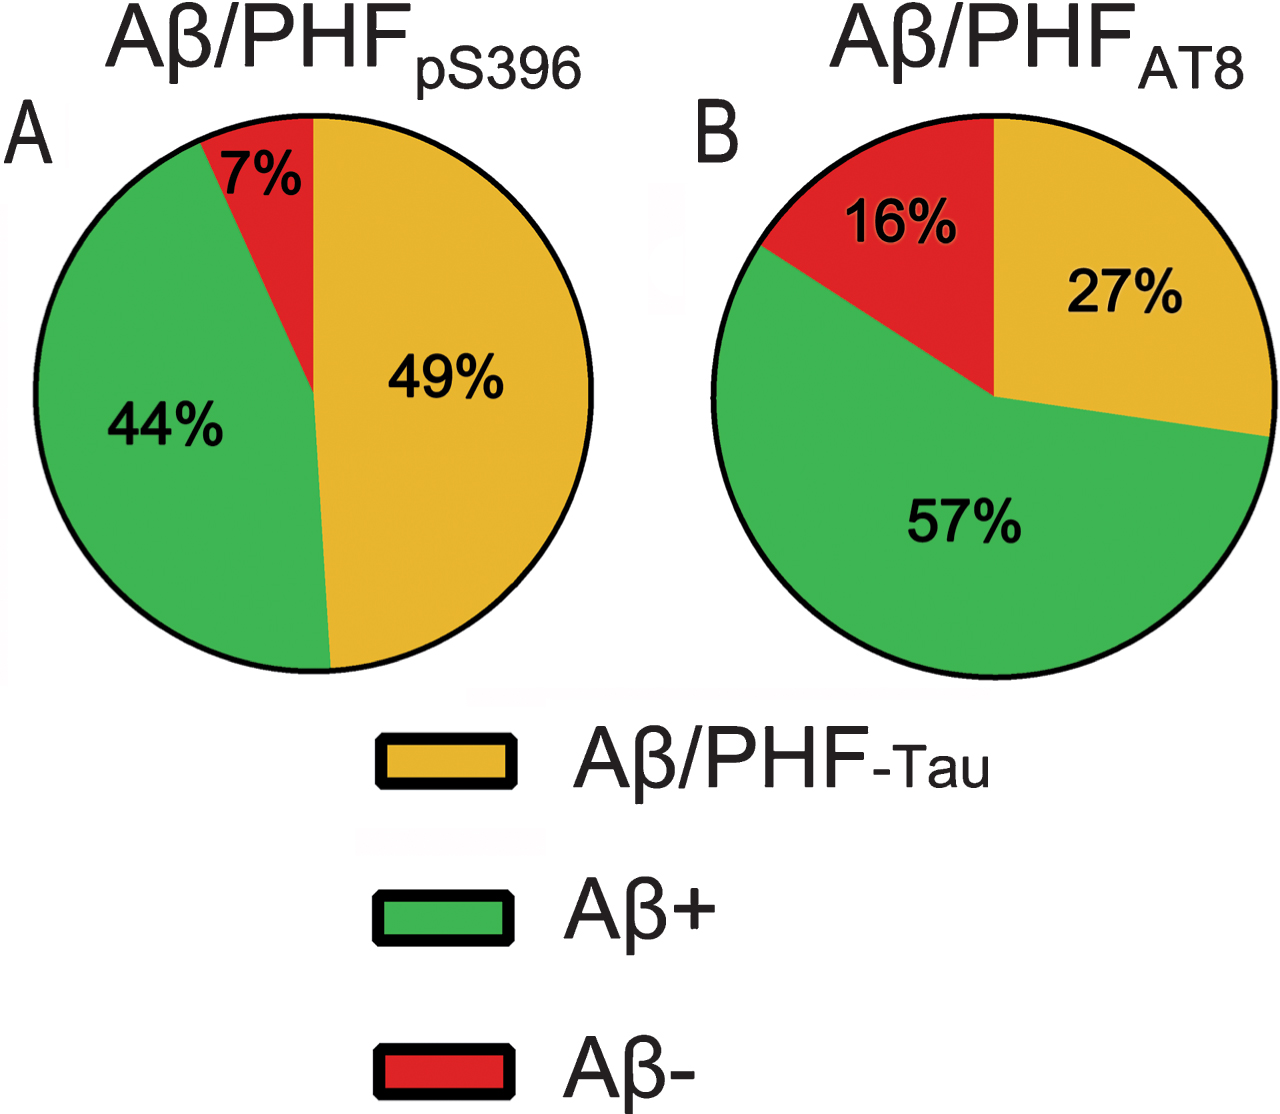 Pie charts showing the percentages of labeled plaques in double immunostaining studies: Aβ/PHFpS396 (A) and Aβ/PHFAT8 (B) combinations are shown. Both analyses displayed a higher proportion of plaques showing Aβ-ir and a much-reduced portion of negative Aβ plaques.